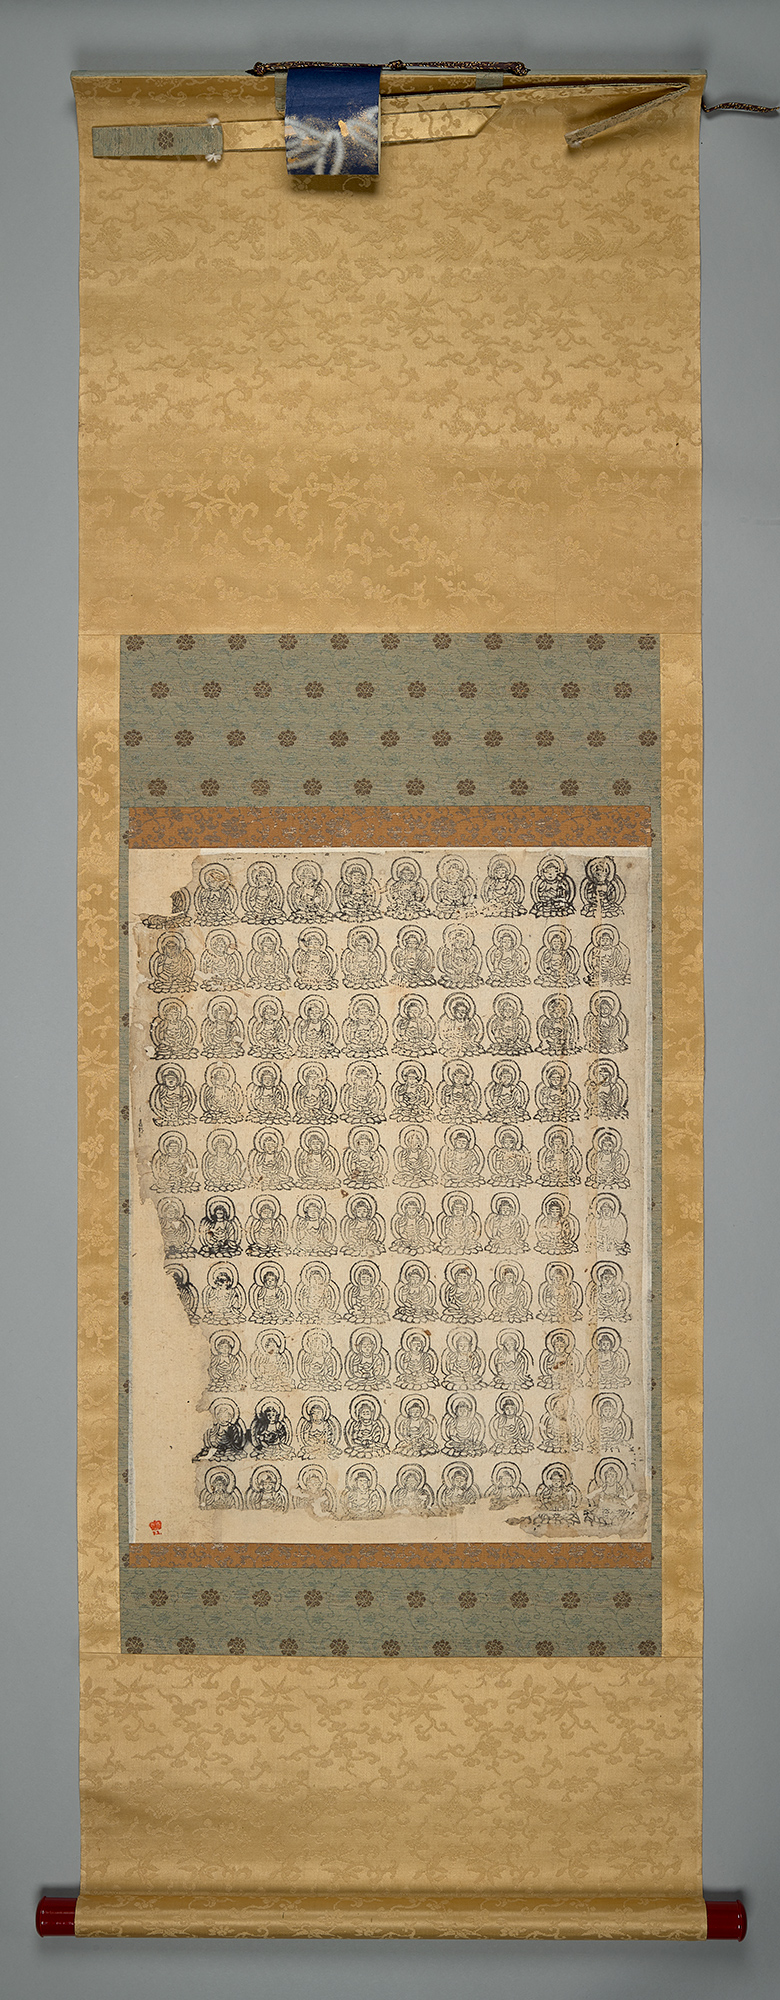 One hundred seated images of Amida Nyorai, early 12th century, Japan (The British Library)